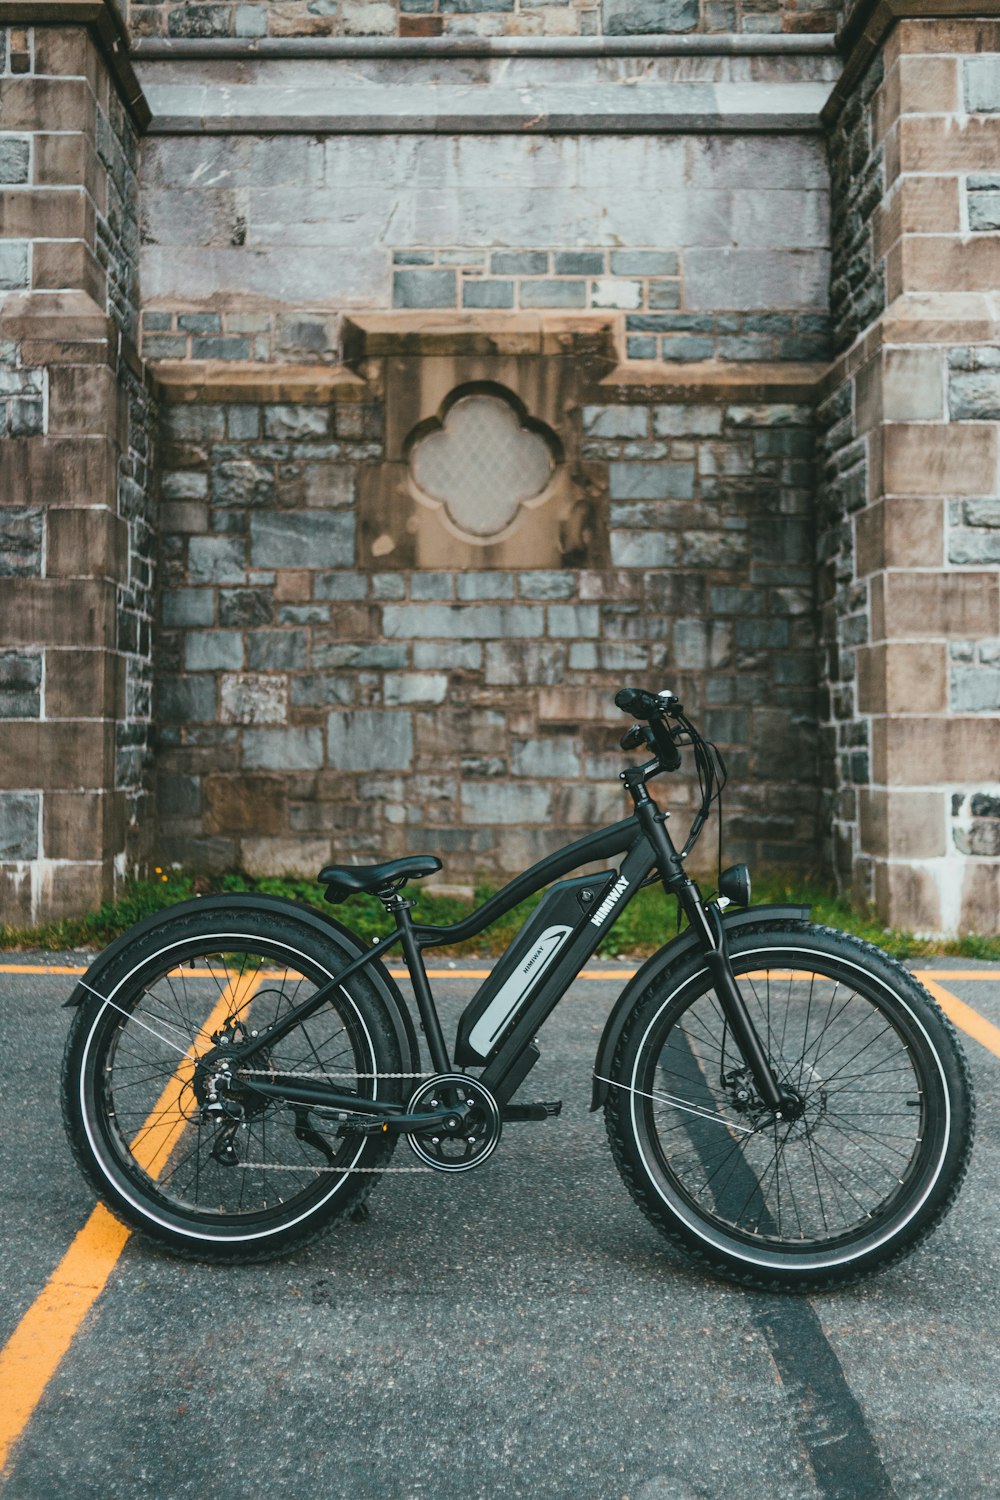 black and gray bicycle leaning on brown brick wall